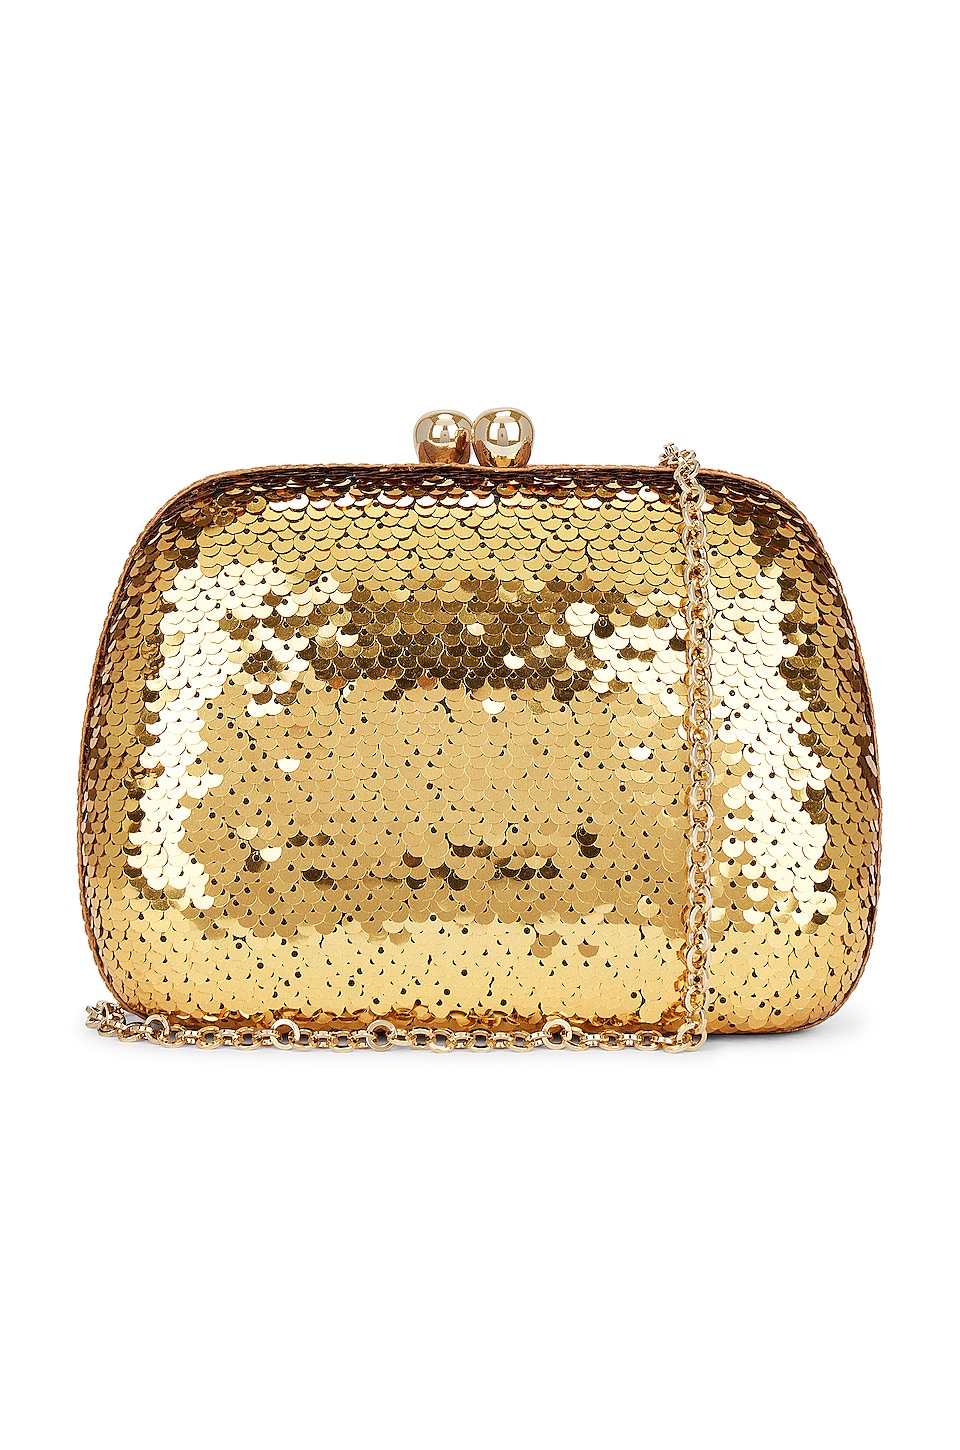 a new day | Bags | A New Day Gold Glitter Sparkle Clutch Wristlet Hand Bag  | Poshmark